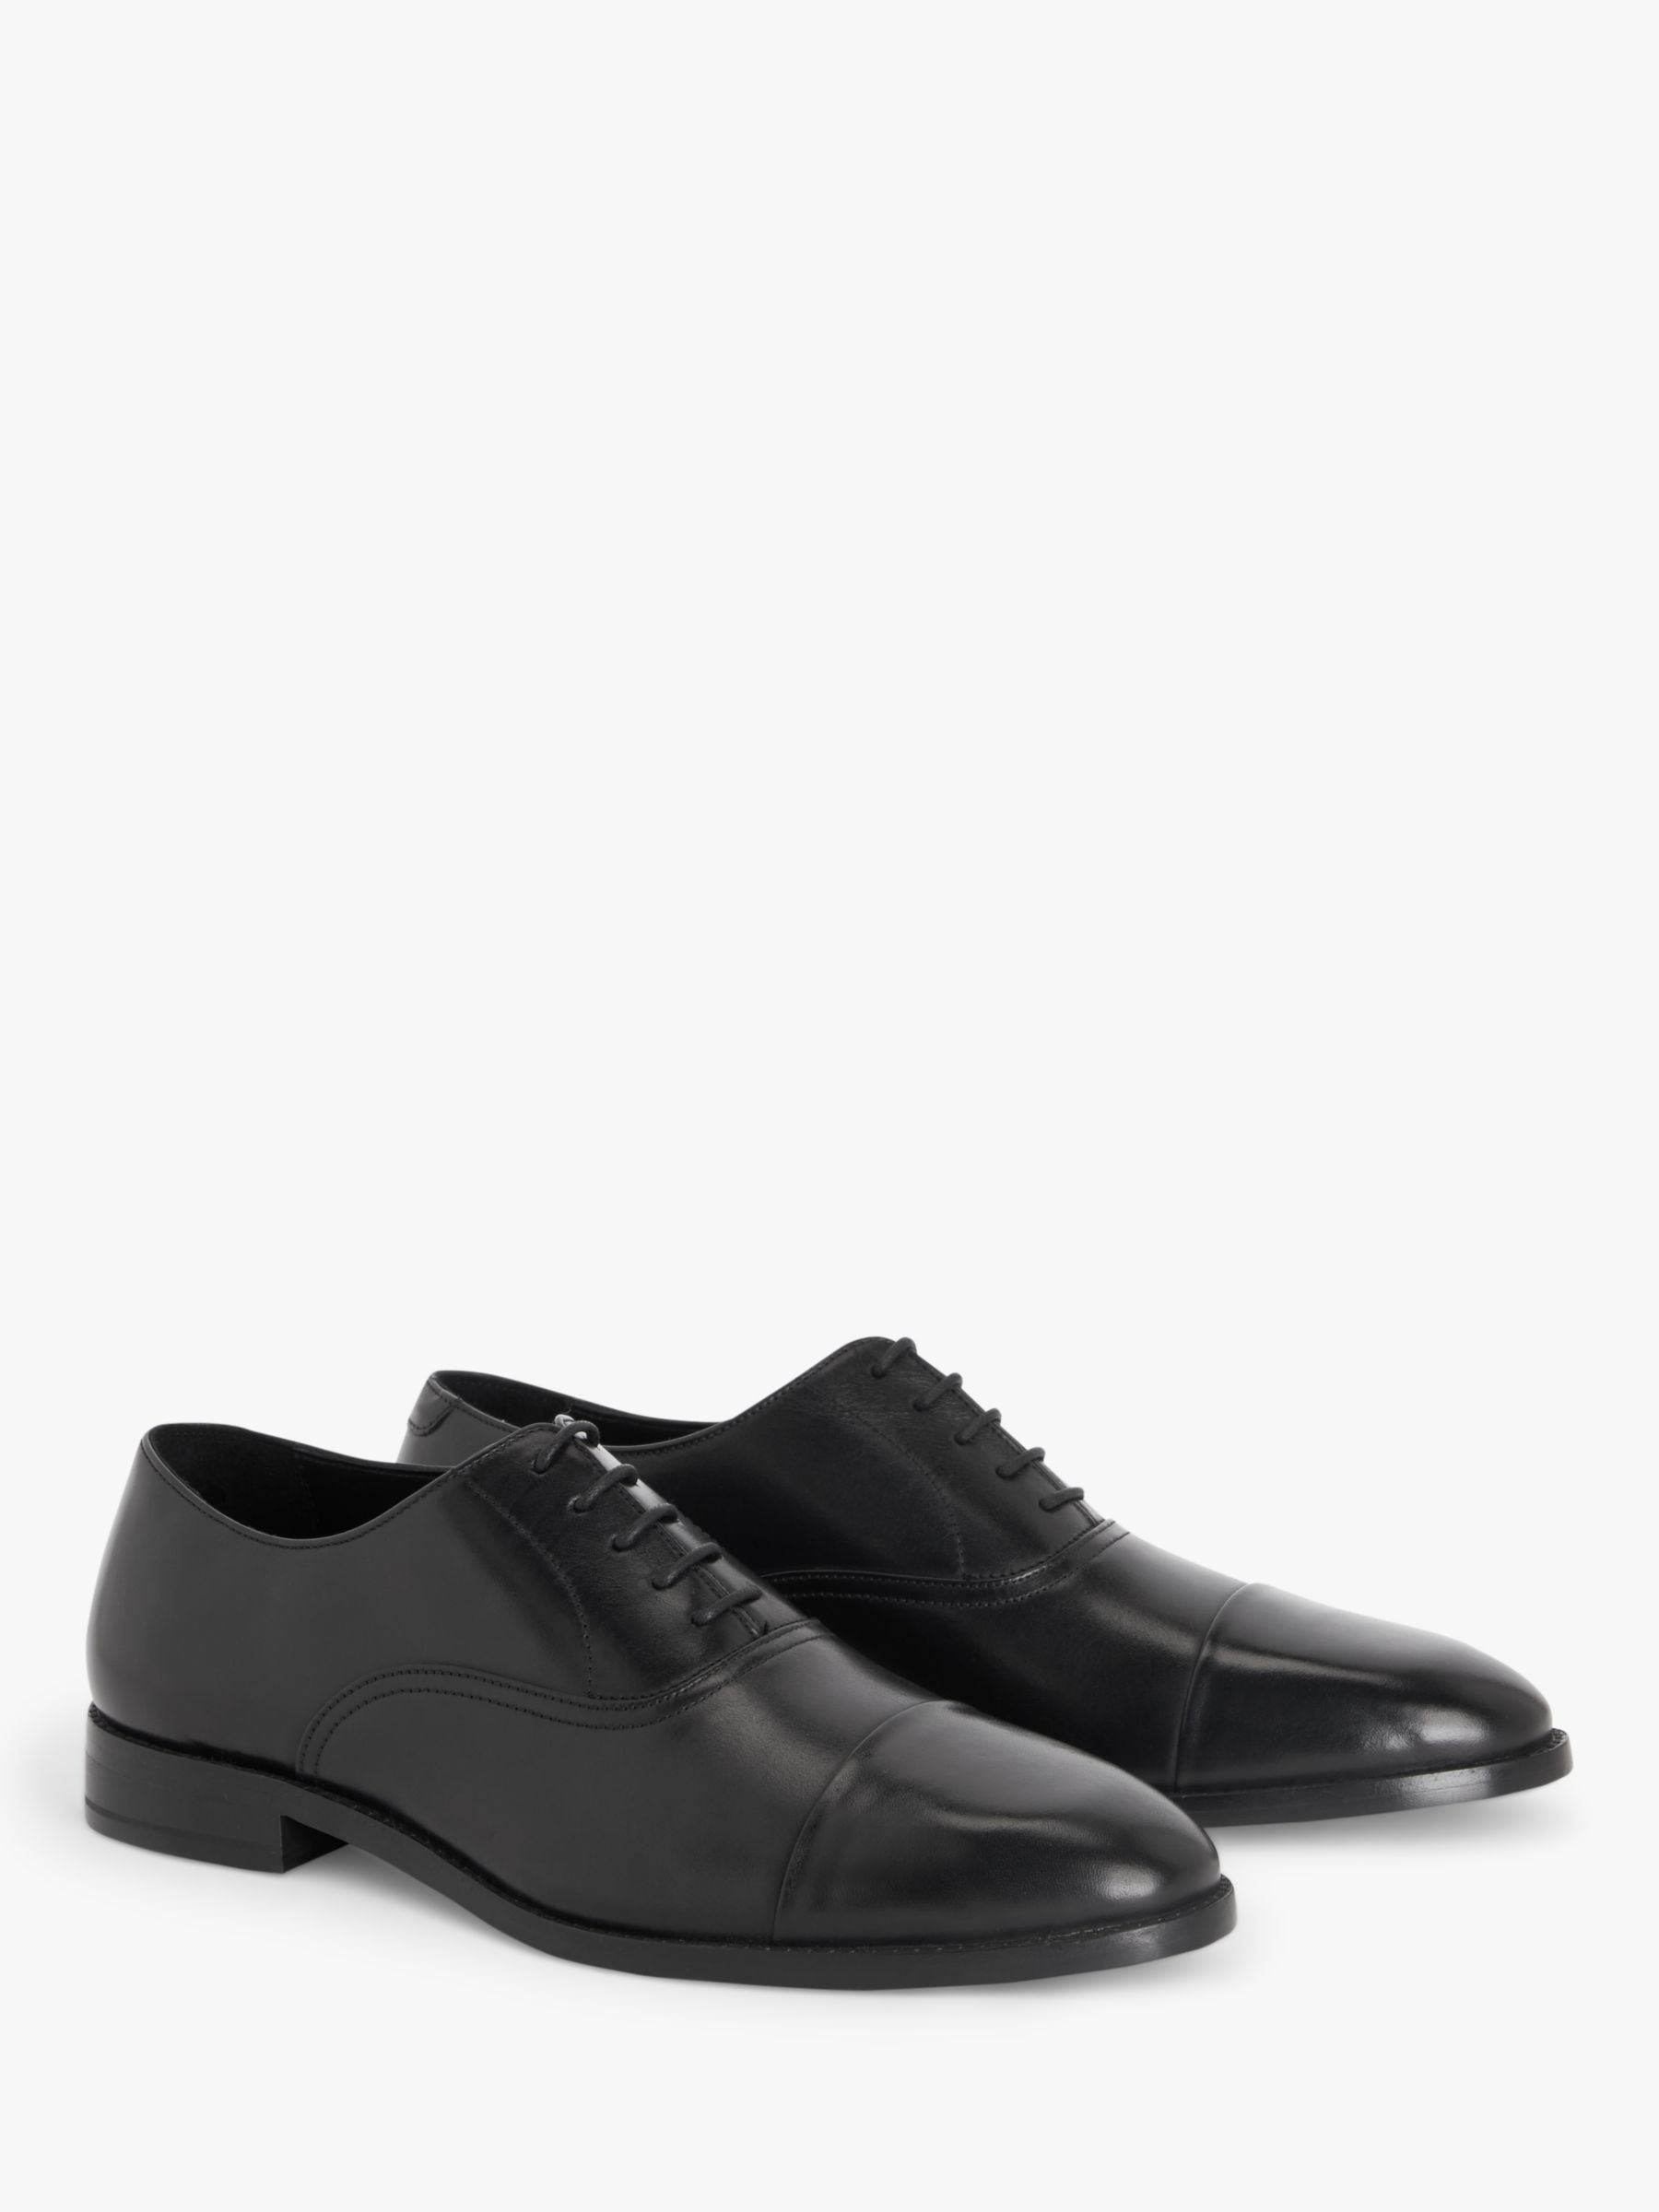 John Lewis Formal Leather Sole Oxford Shoes, Black, 9